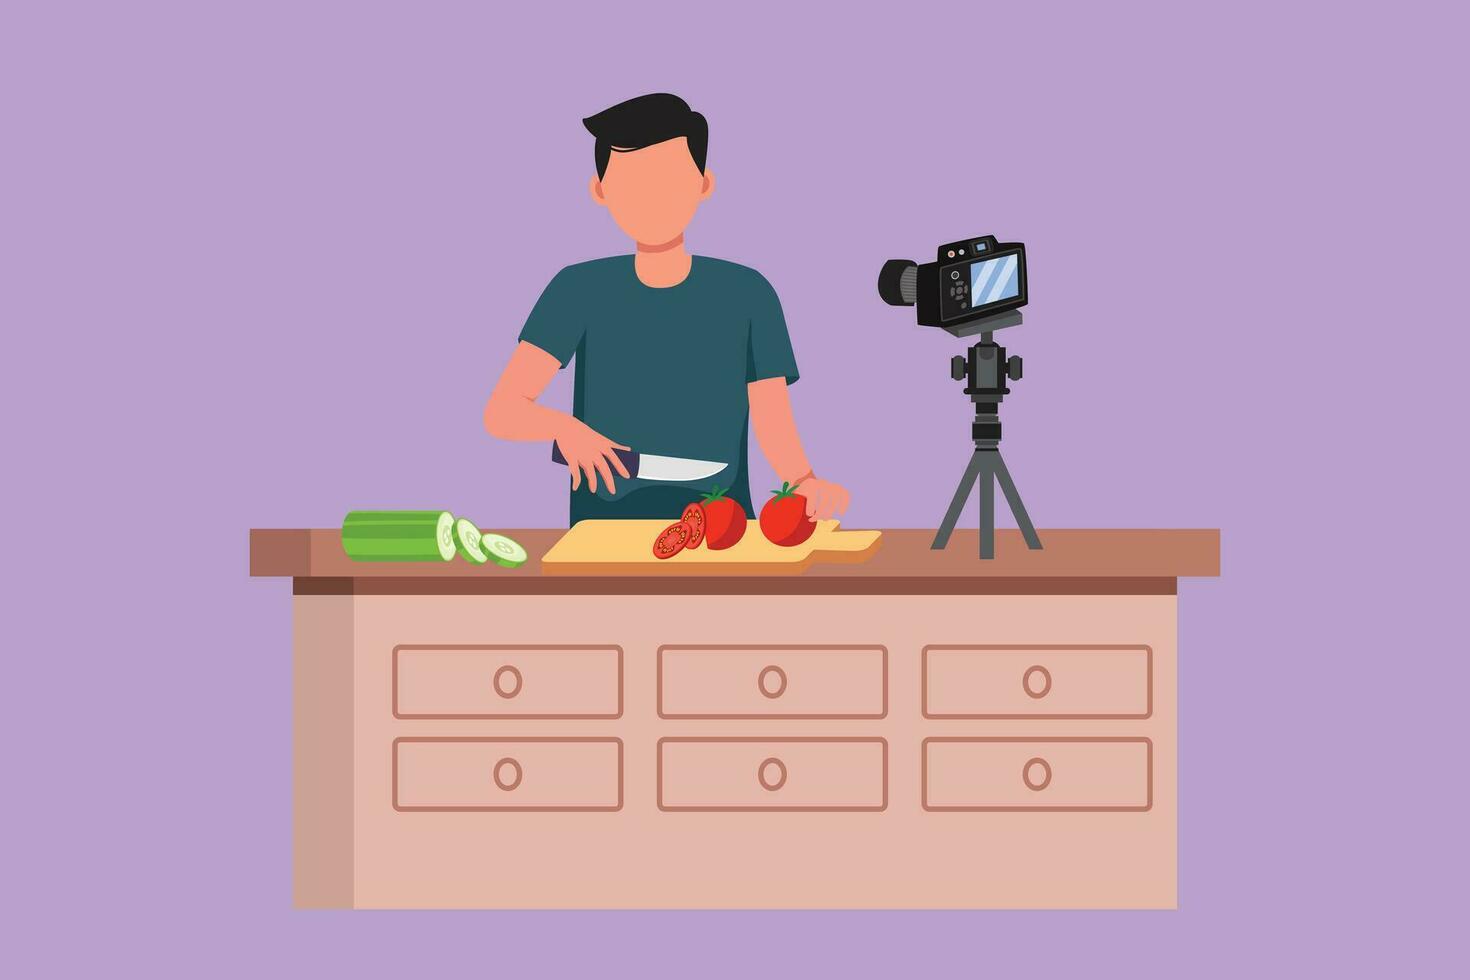 Character flat drawing of young man chef in uniform standing in kitchen and cutting onion while filming himself for blog. On kitchen counter are vegetables, spices. Cartoon design vector illustration